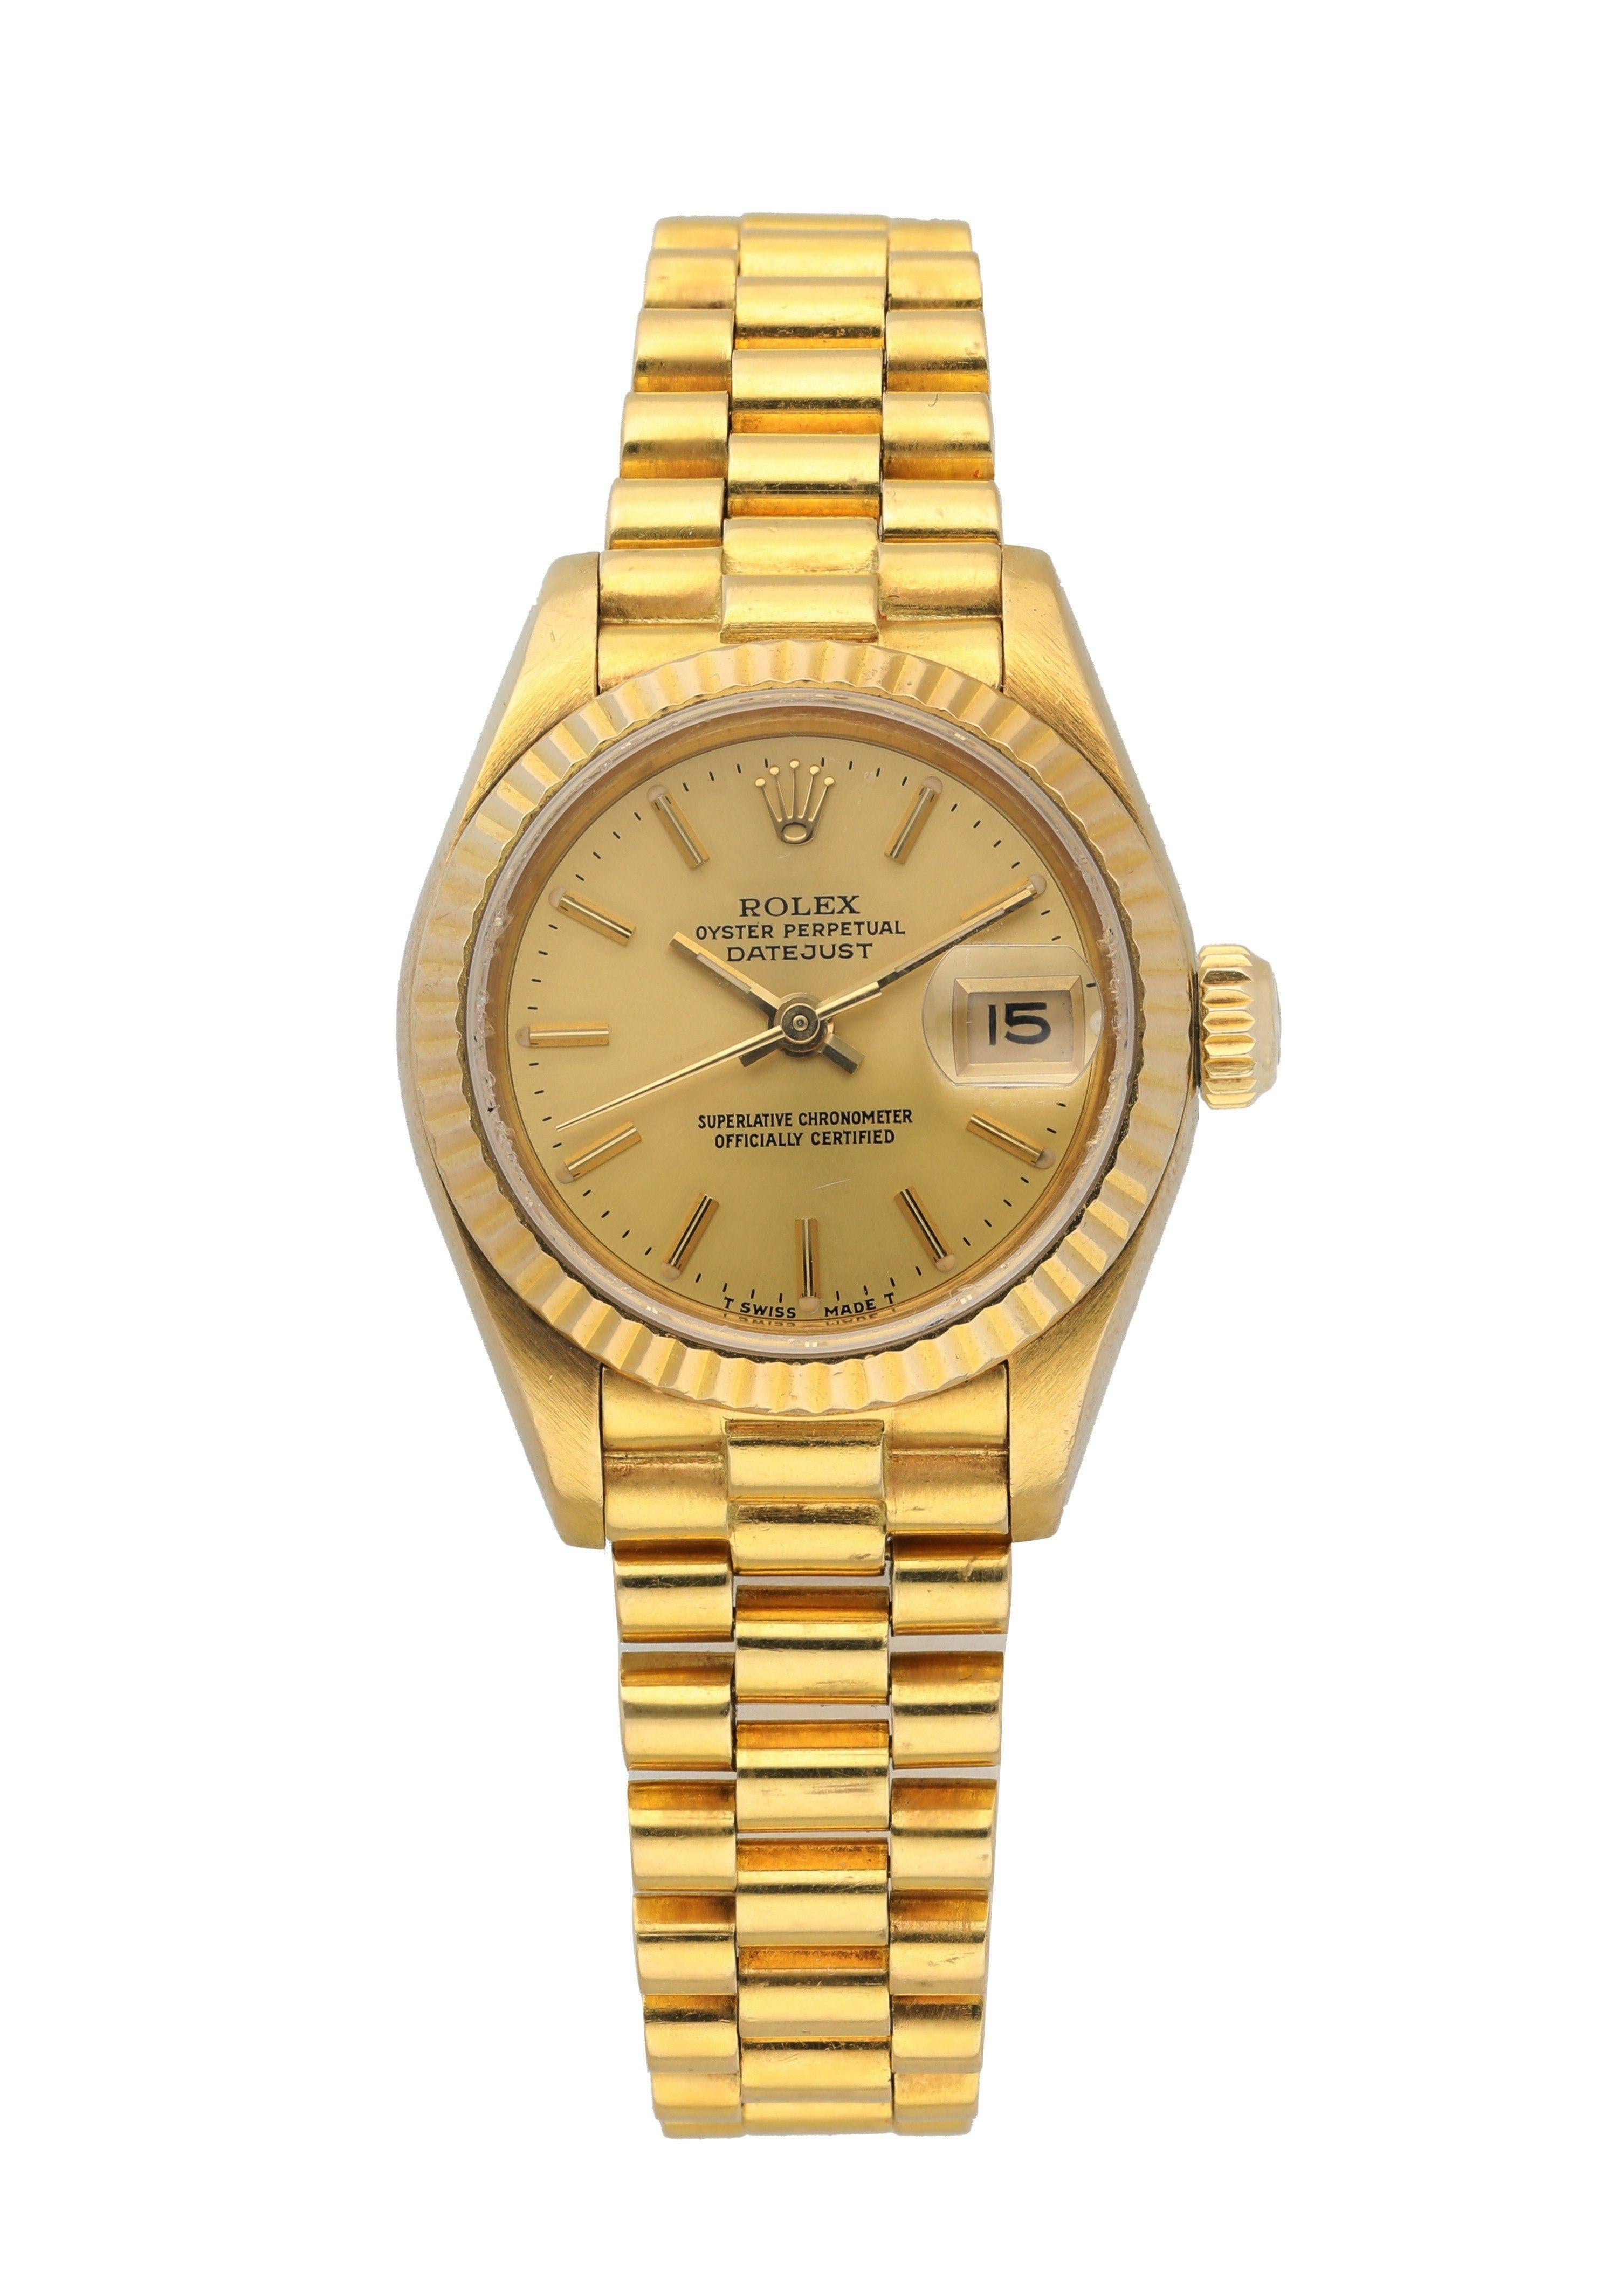 Rolex Datejust 69178 18k Yellow Gold Ladies Watch. 
26mm 18k Yellow gold case. 
Yellow Gold fluted bezel. 
Champagne dial with gold hands and index hour markers. 
Minute markers on the outer dial. 
Date display at the 3 o'clock position. 
Yellow